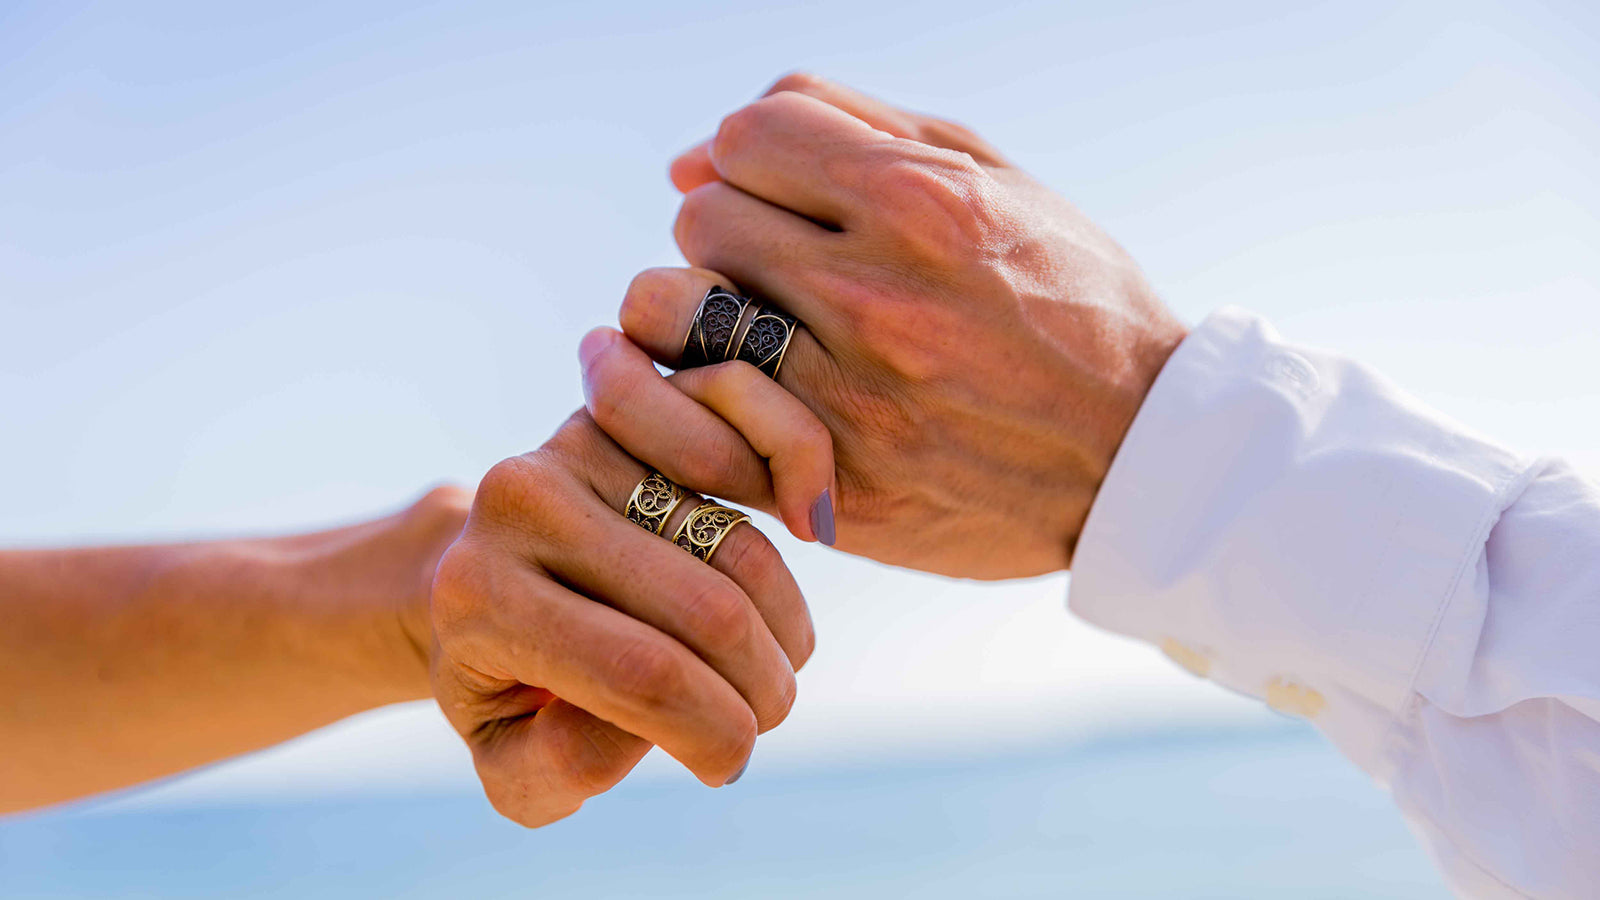 What are Promise rings? A symbol of commitment for modern couples